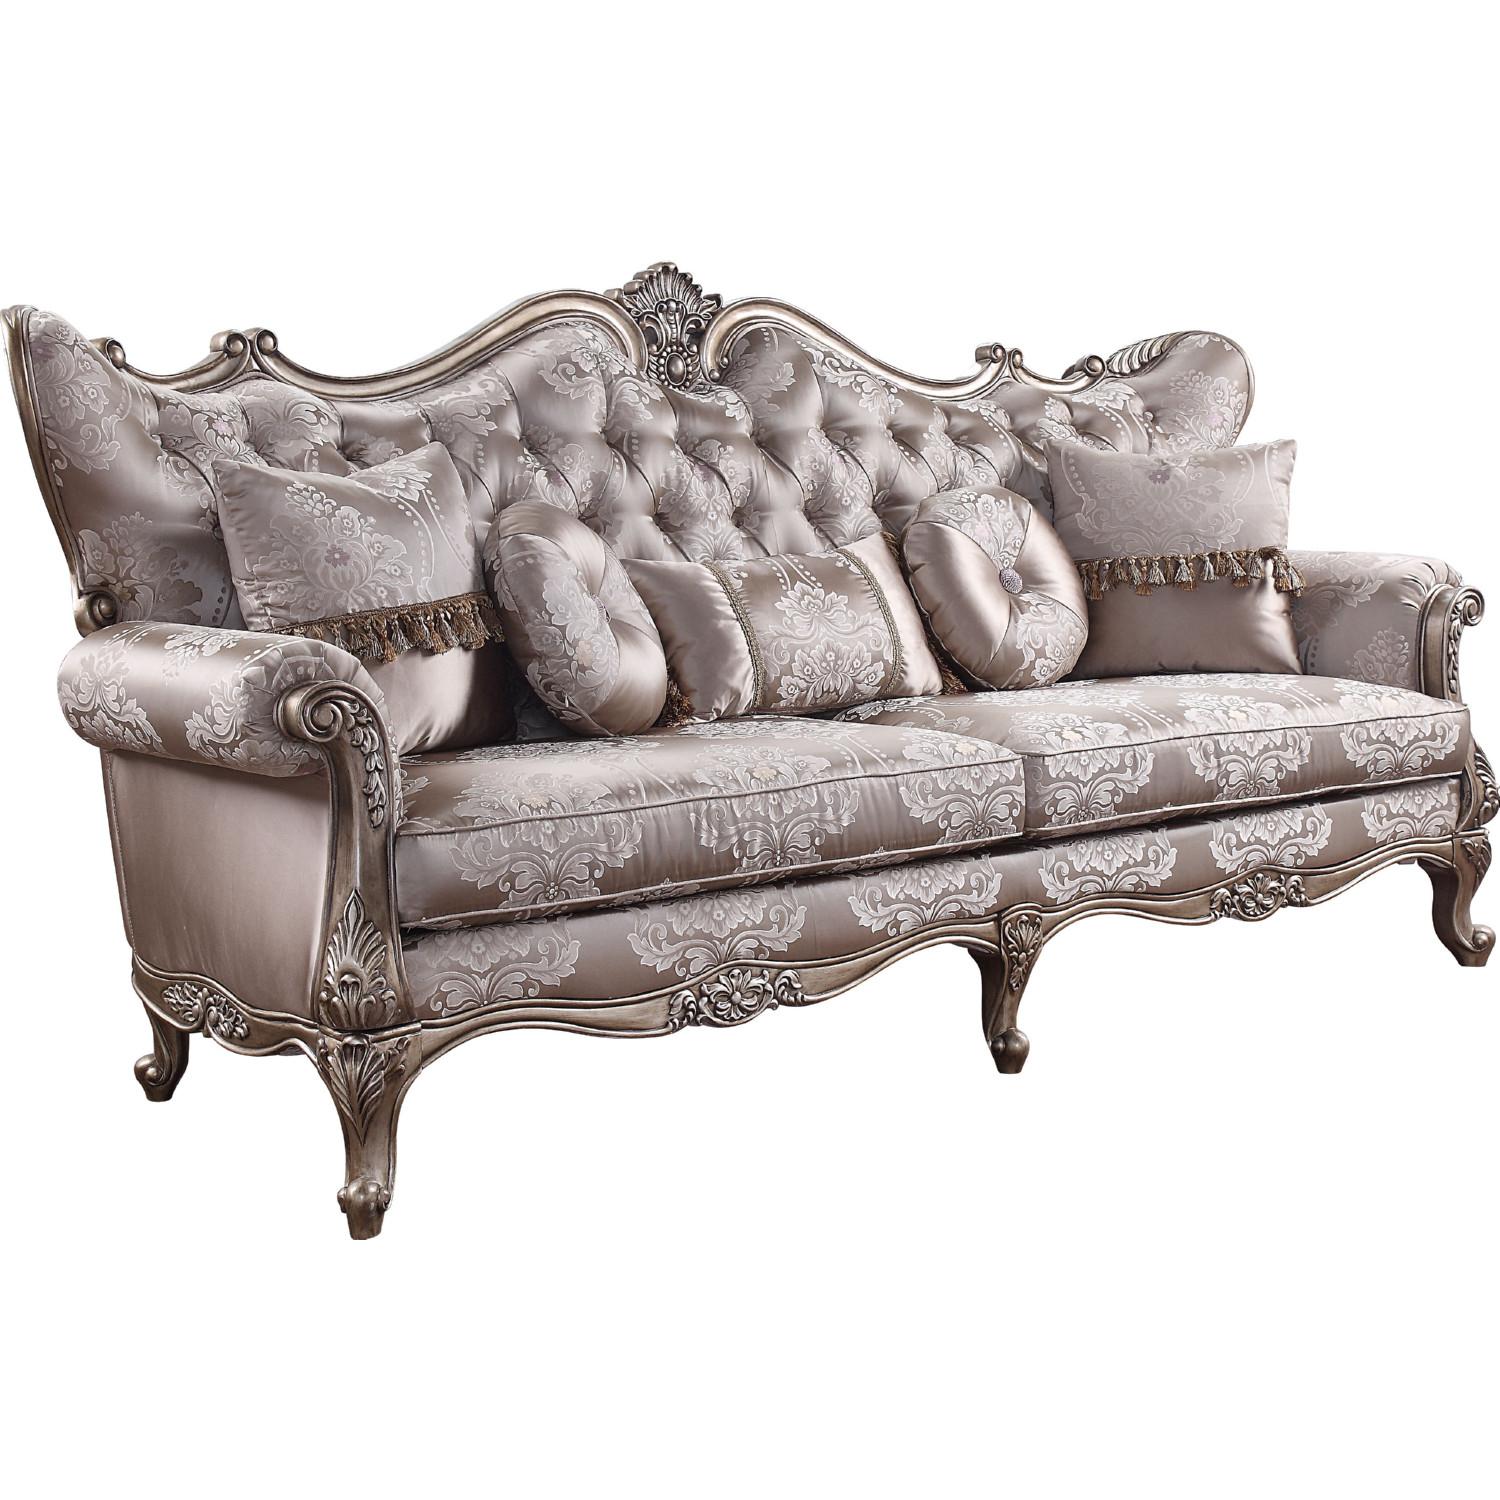 Traditional,  Vintage Sofa Jayceon 54865 54865 Jayceon in Champagne Fabric